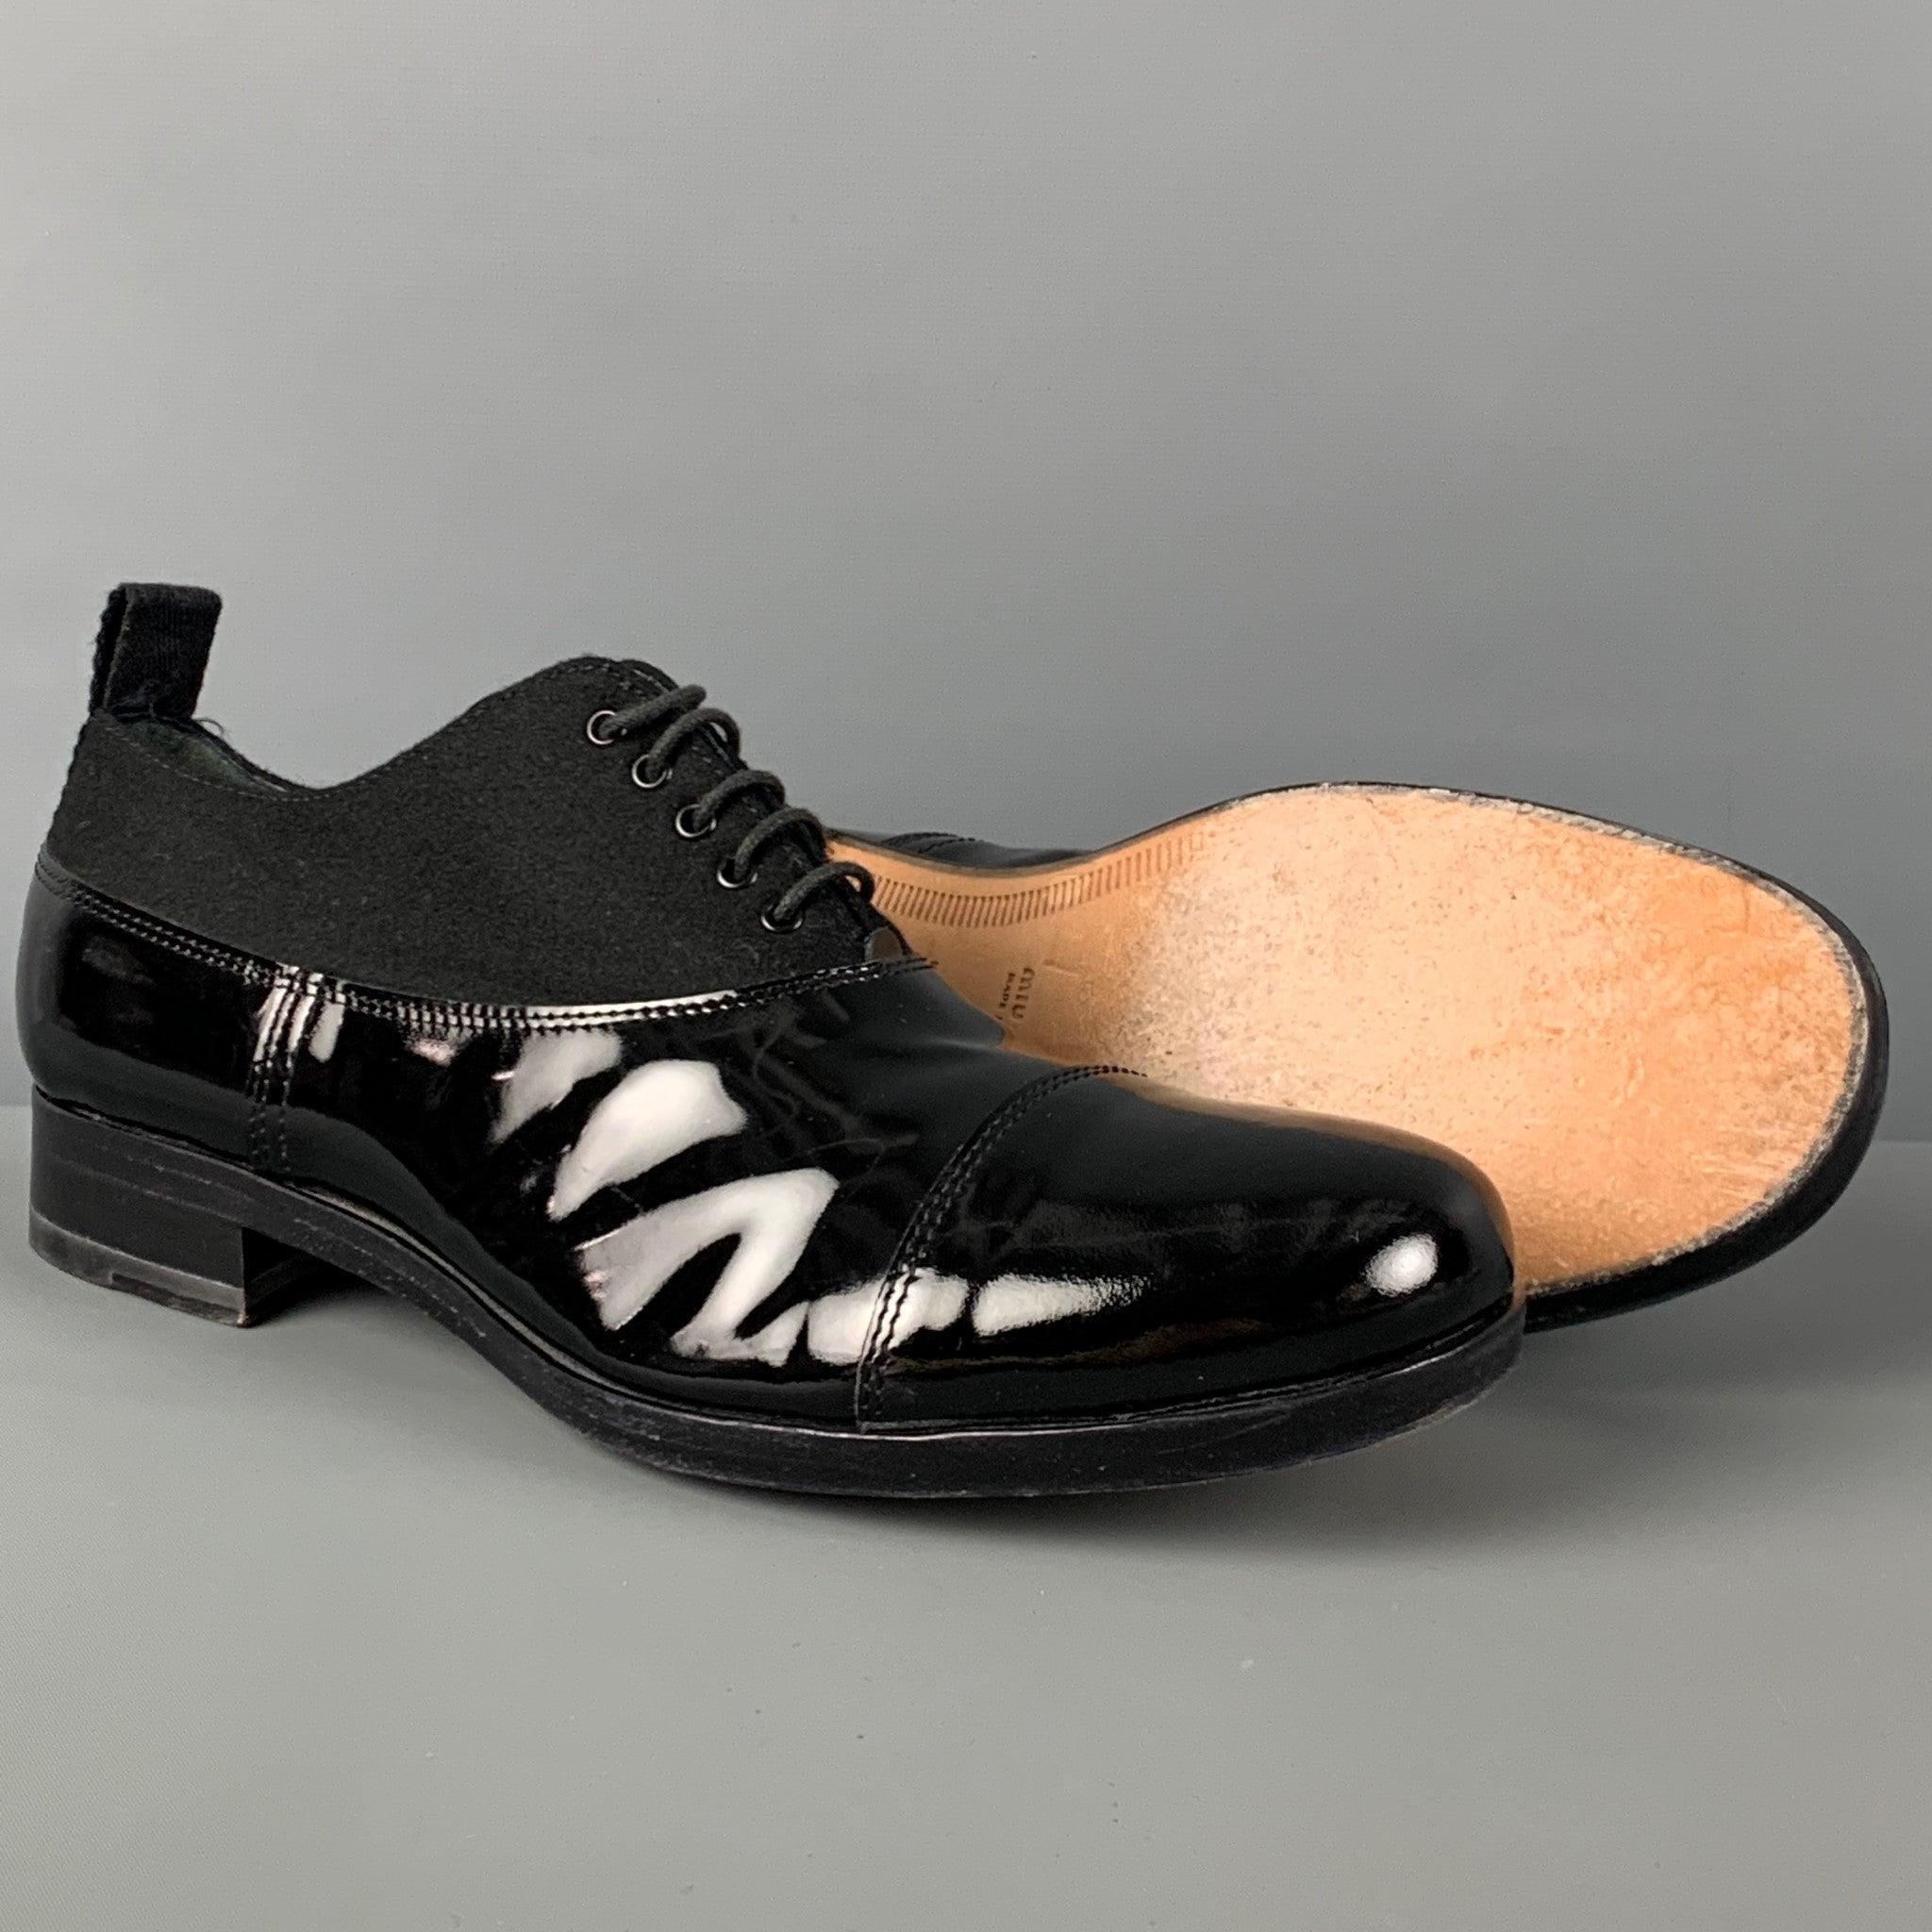 MIU MIU Size 9 Black Mixed Materials Leather Shoes In Good Condition For Sale In San Francisco, CA